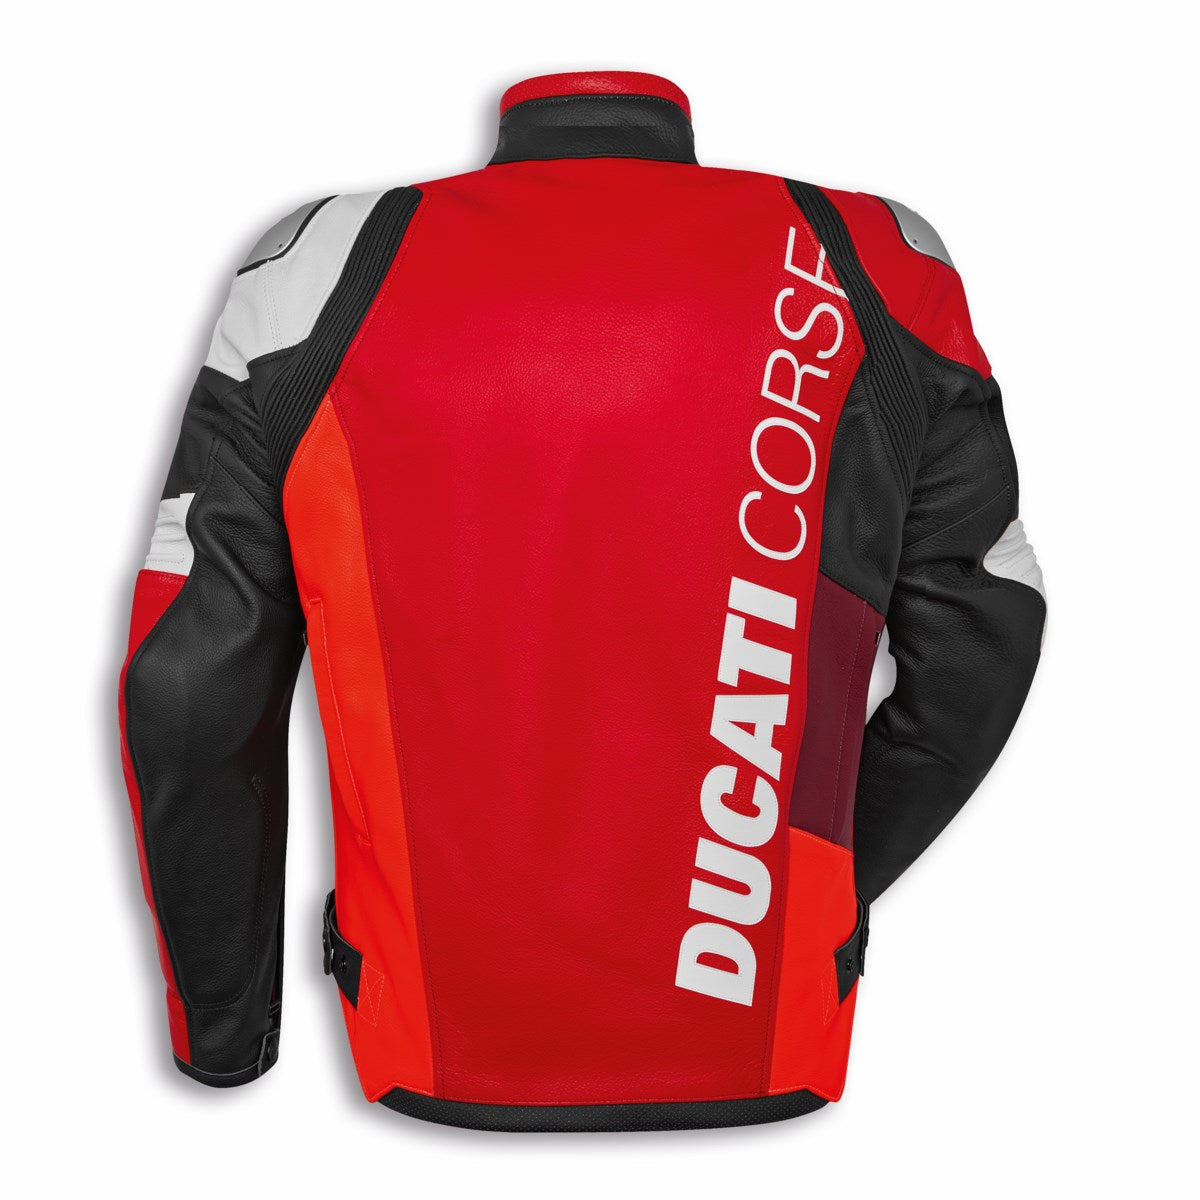 Ducati Corse C6 Perforated Leather Jacket